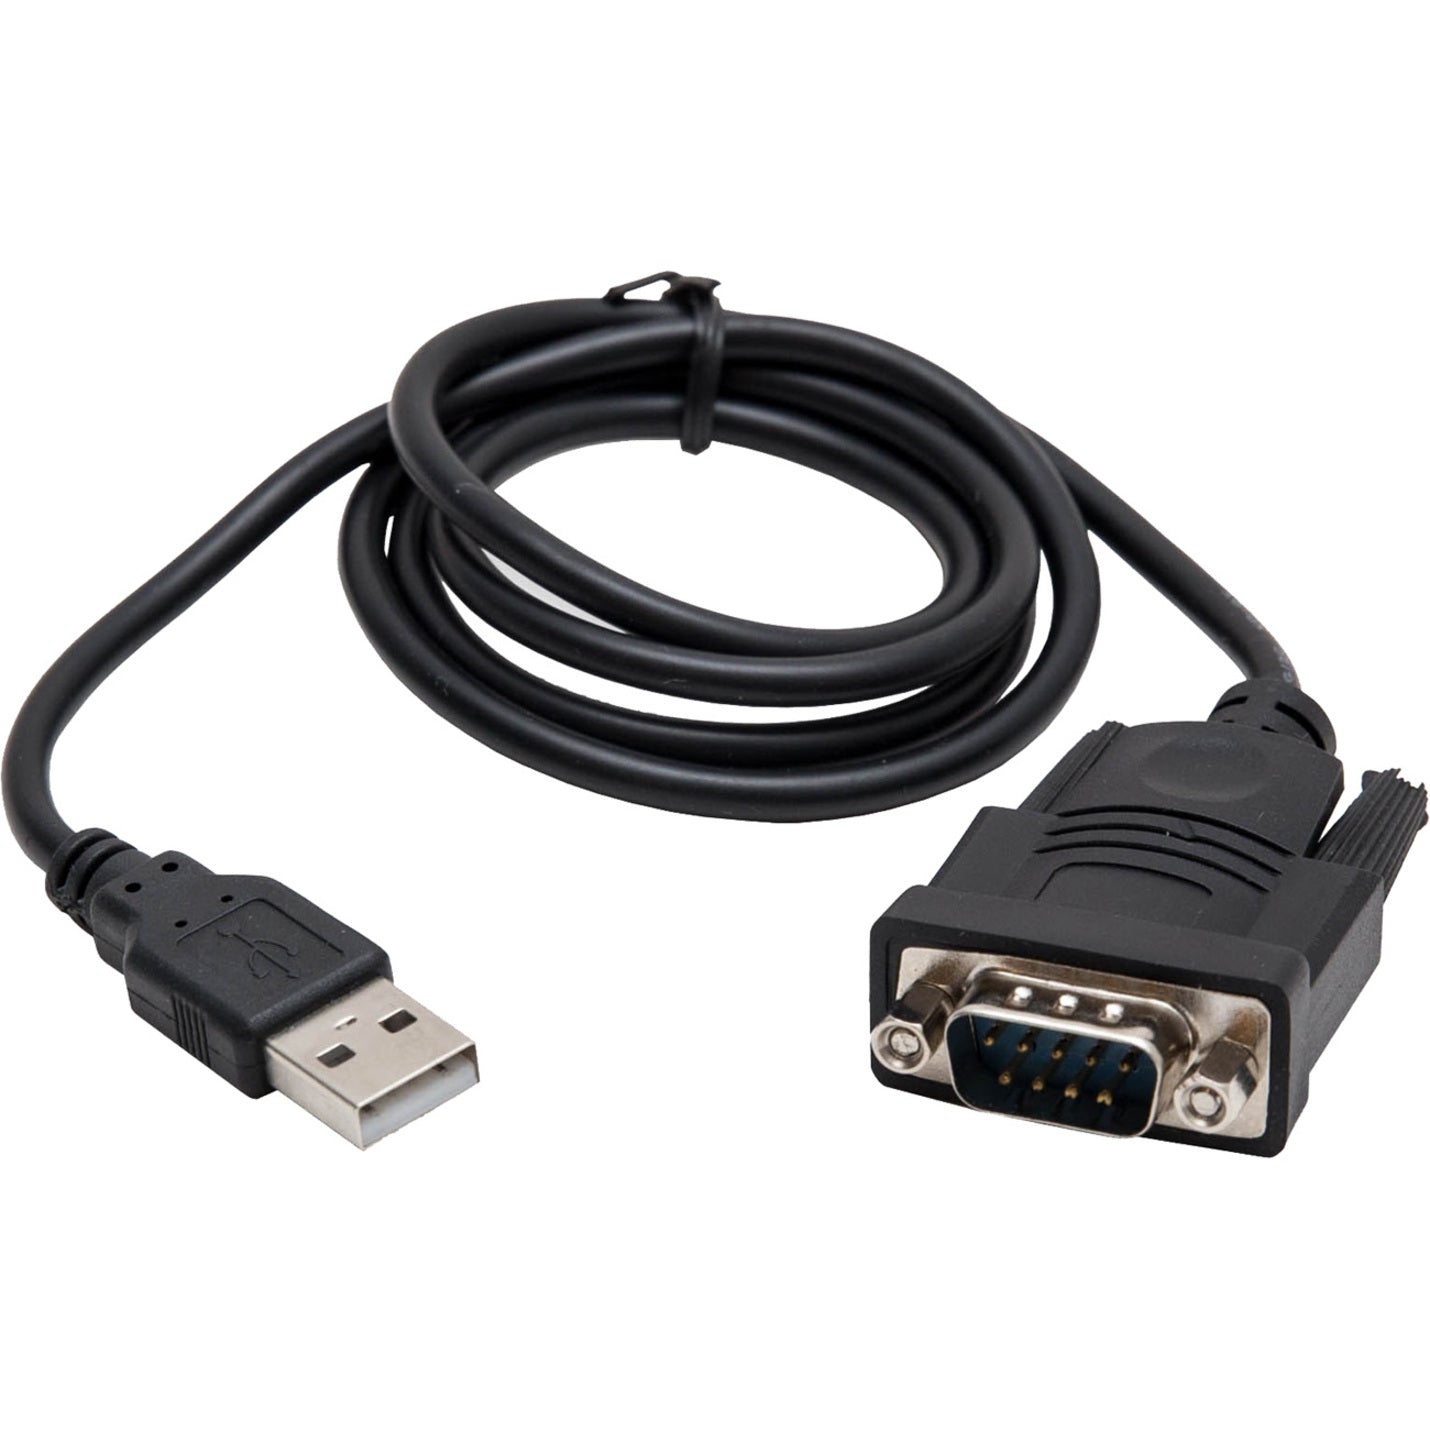 SYBA Multimedia USB 1.1 to Serial DB9 Port RS232 Convertor Cable